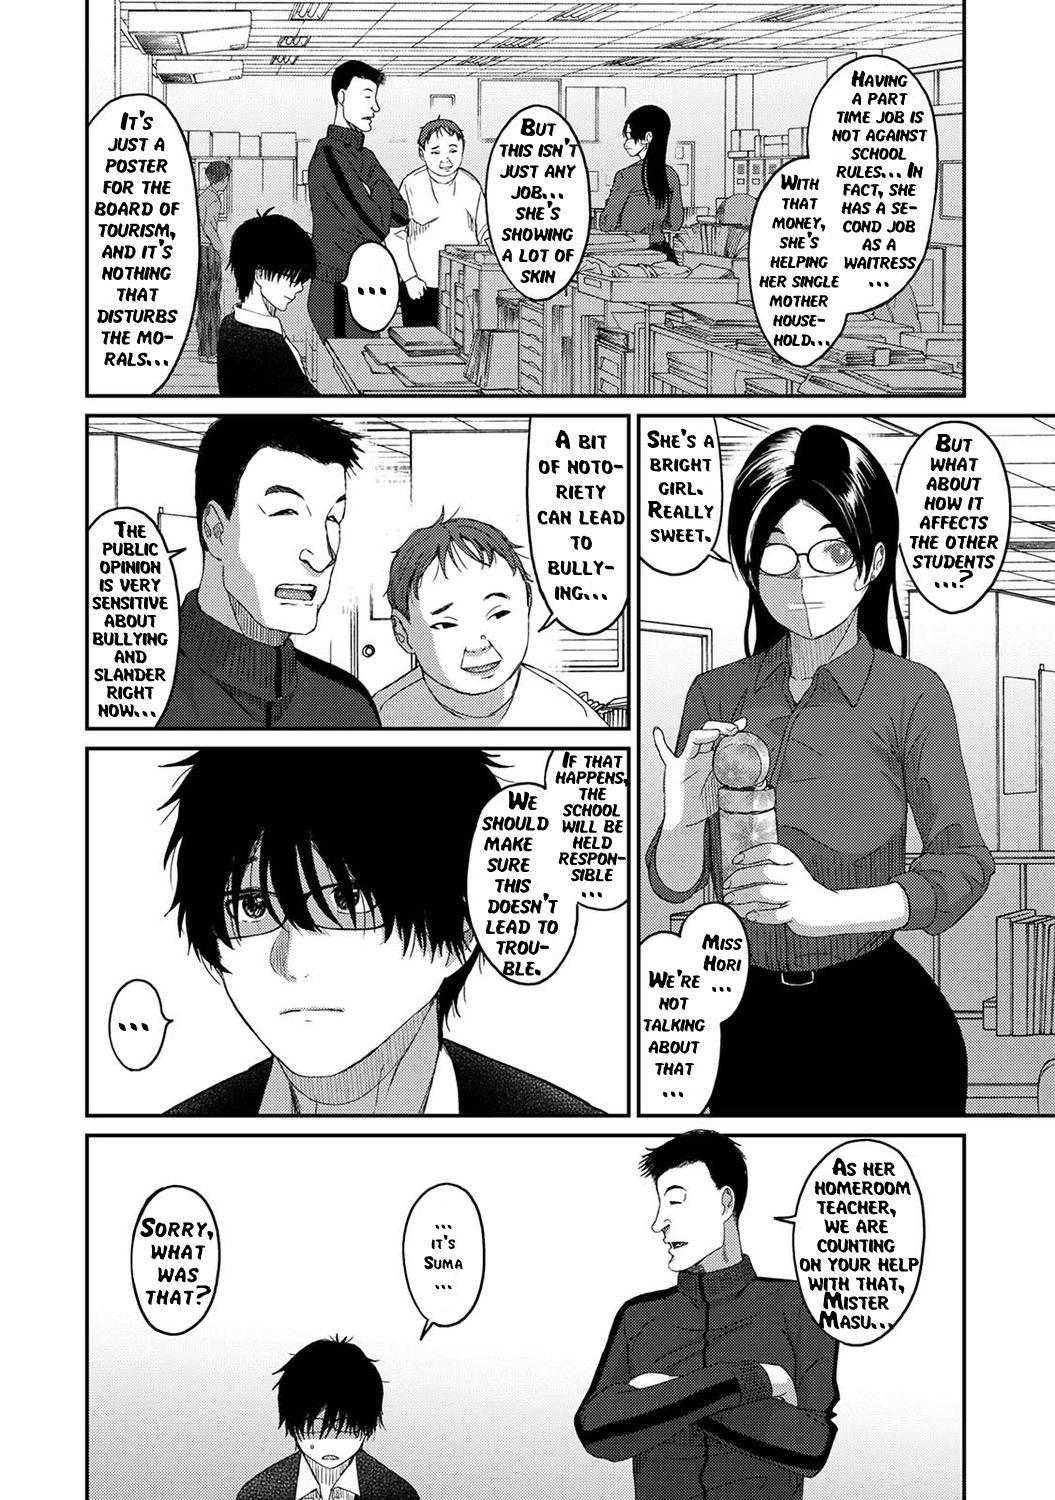 Russian Itaiamai - Chapter 1 Twink - Page 7